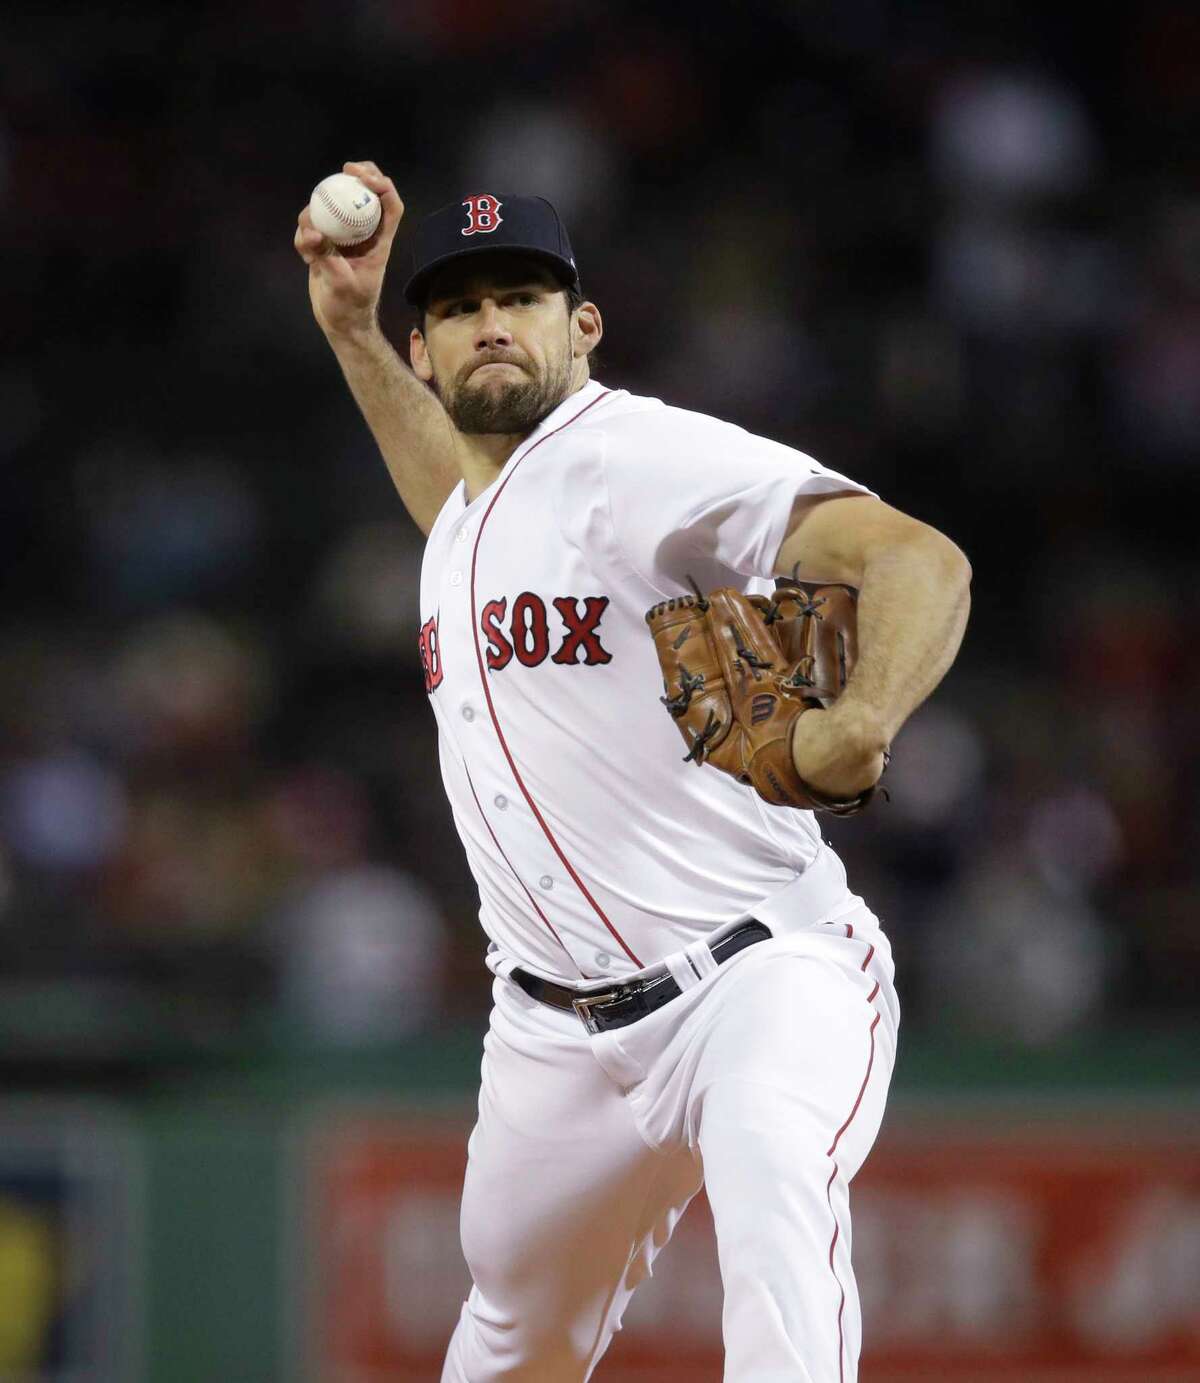 Boston Red Sox starting pitcher Nathan Eovaldi delivers during the first inning of a baseball game against the Baltimore Orioles at Fenway Park in Boston, Monday, Sept. 24, 2018. (AP Photo/Charles Krupa)